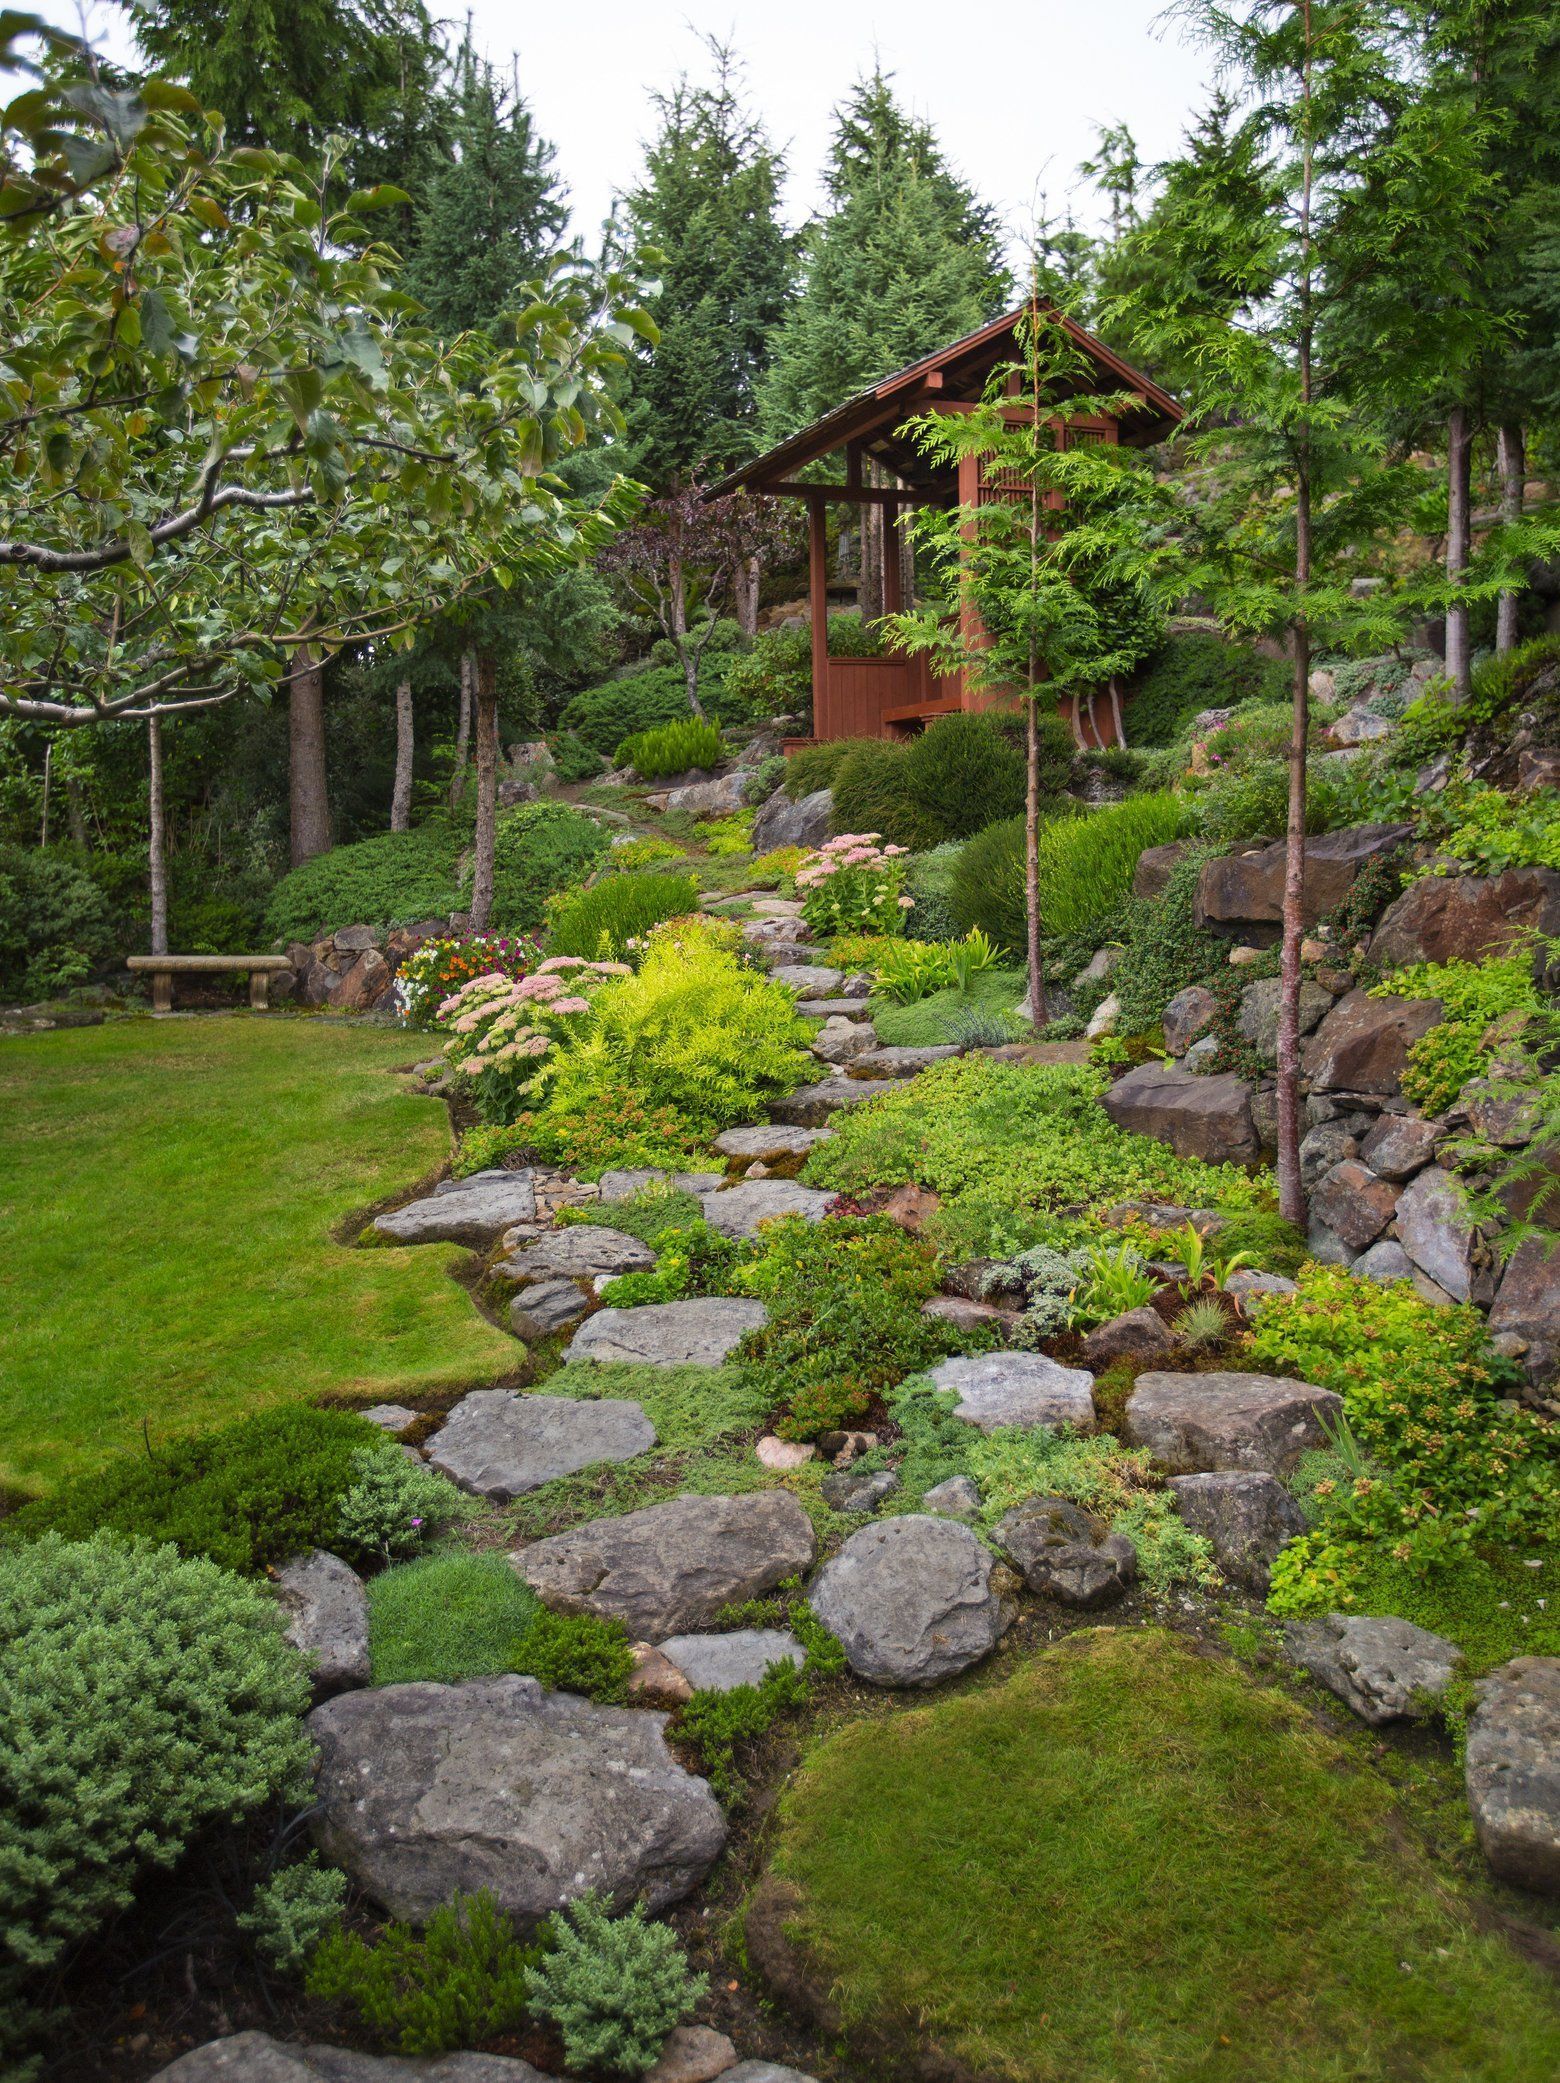 It's a great garden if you like hiking and views — or you're a mountain goat -   20 beauty Natural landscape ideas